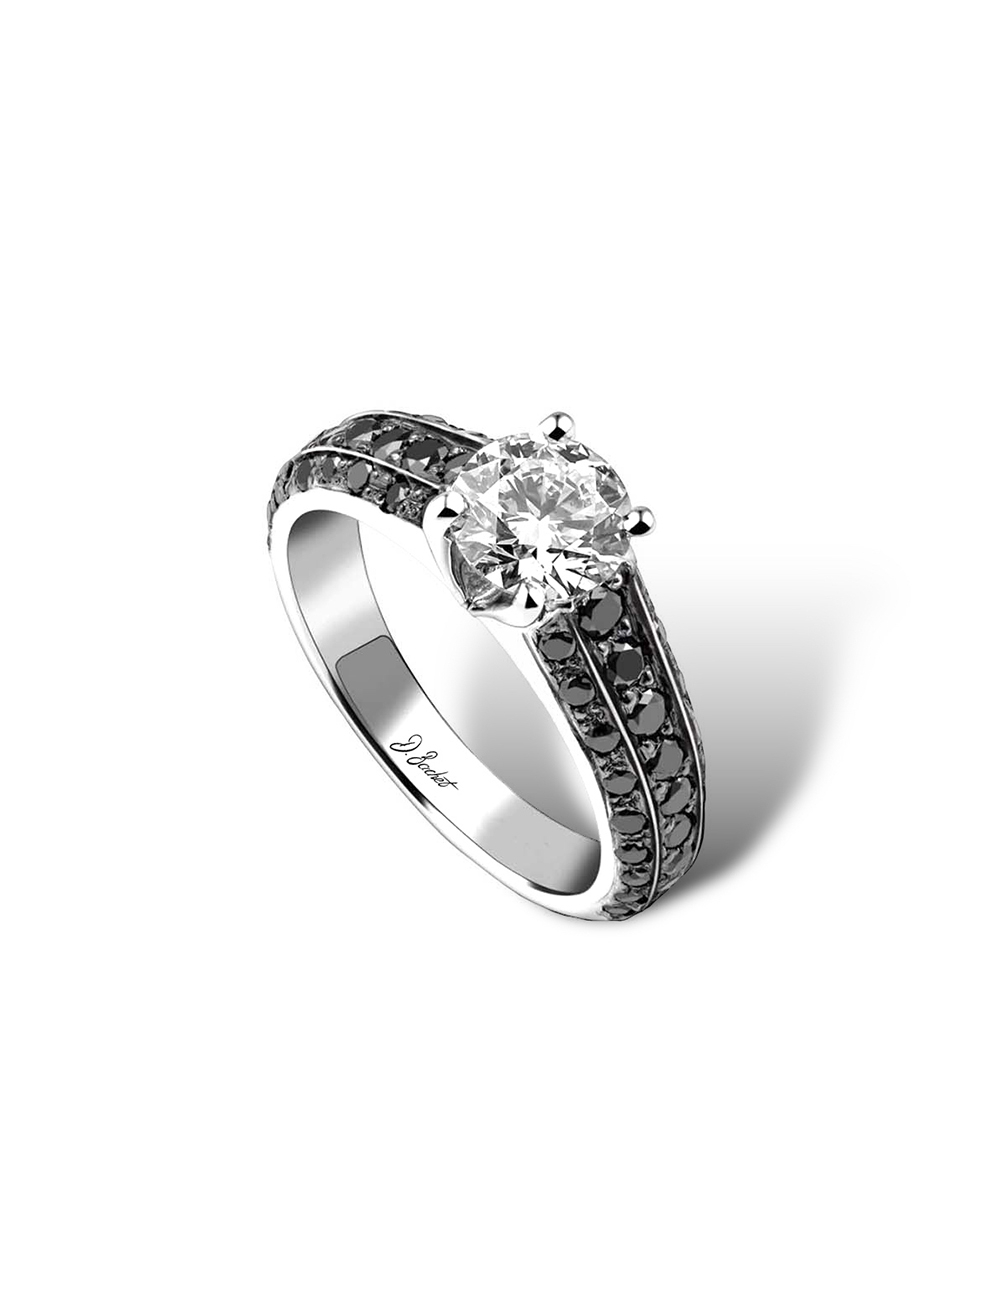 Modern platinum engagement ring with timeless architectural lines. A 0.80ct white diamond and three rows of black diamonds.